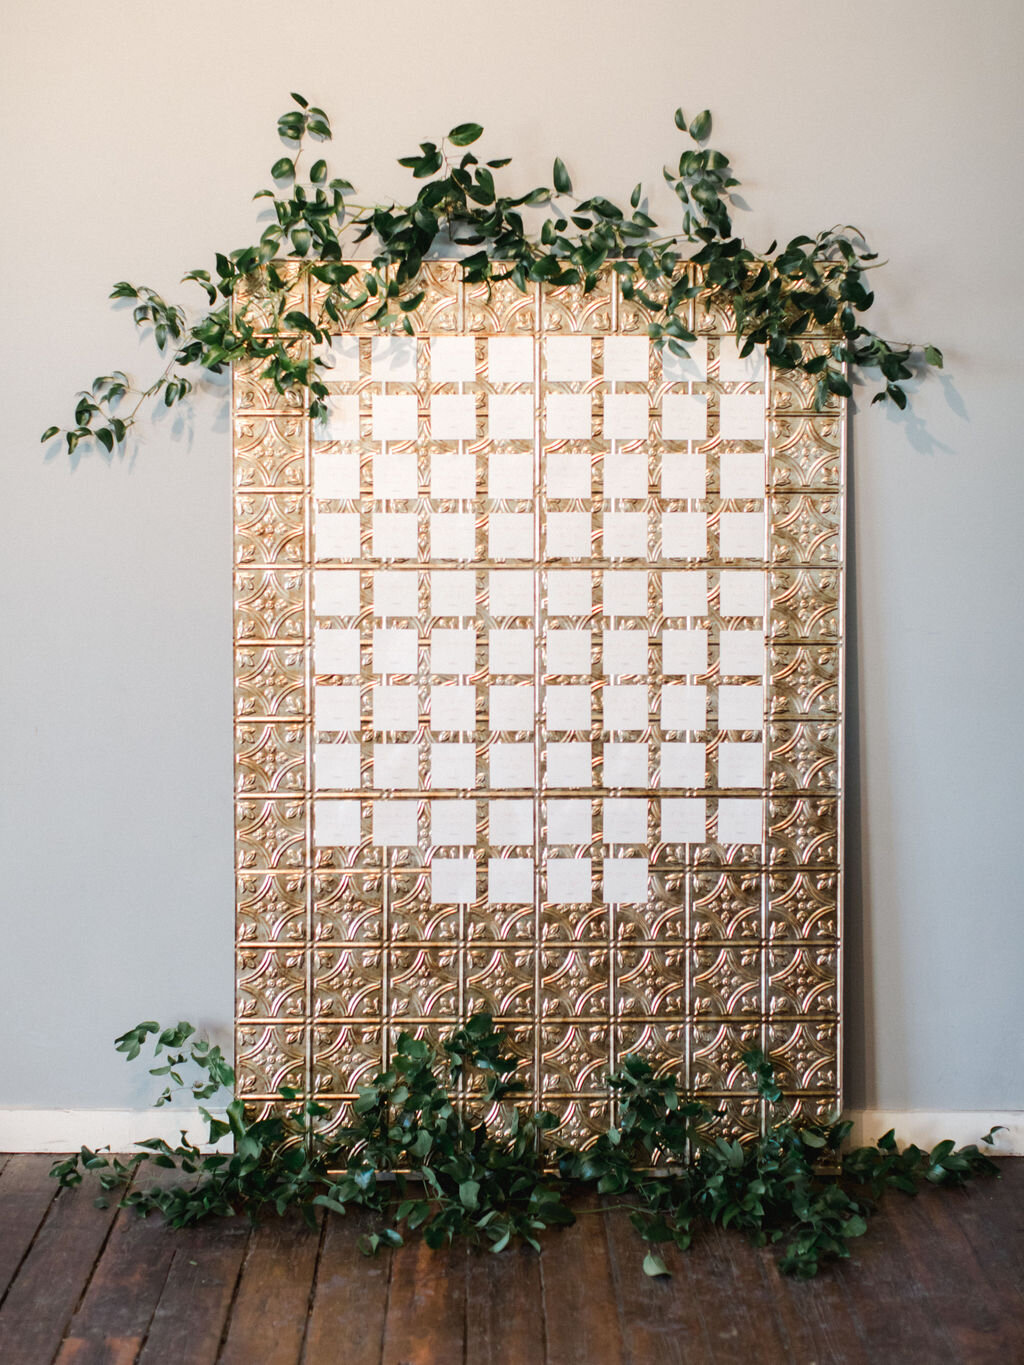 Copper Ceiling Tile Seating Chart with white escort cards